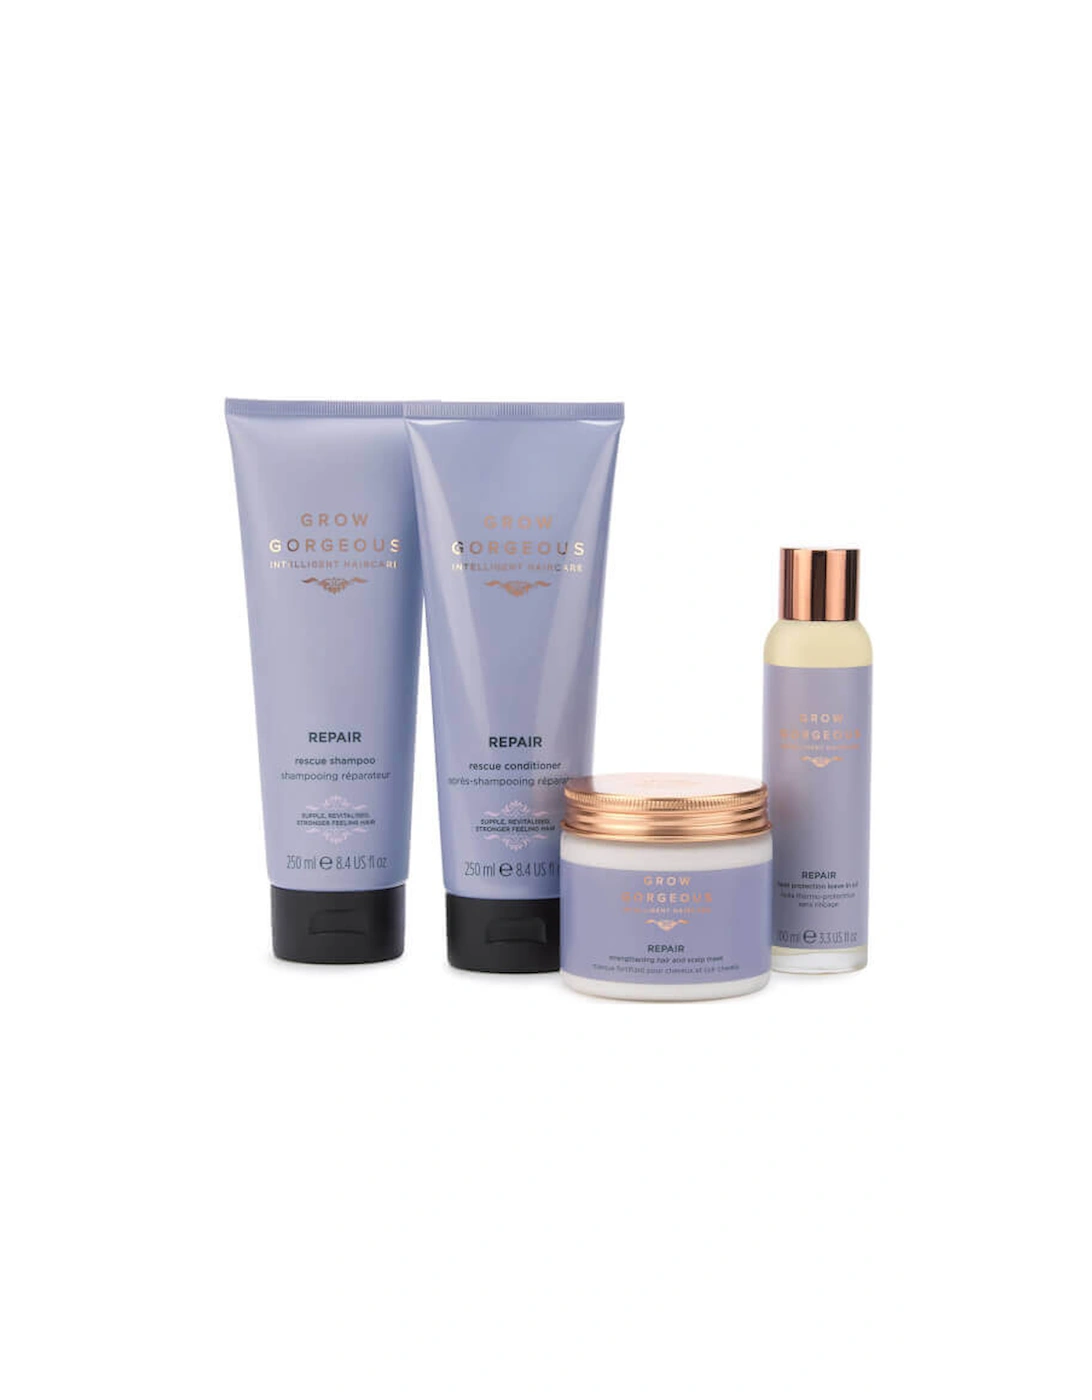 NEW Repair Collection (Worth £80.00) - Grow Gorgeous, 2 of 1